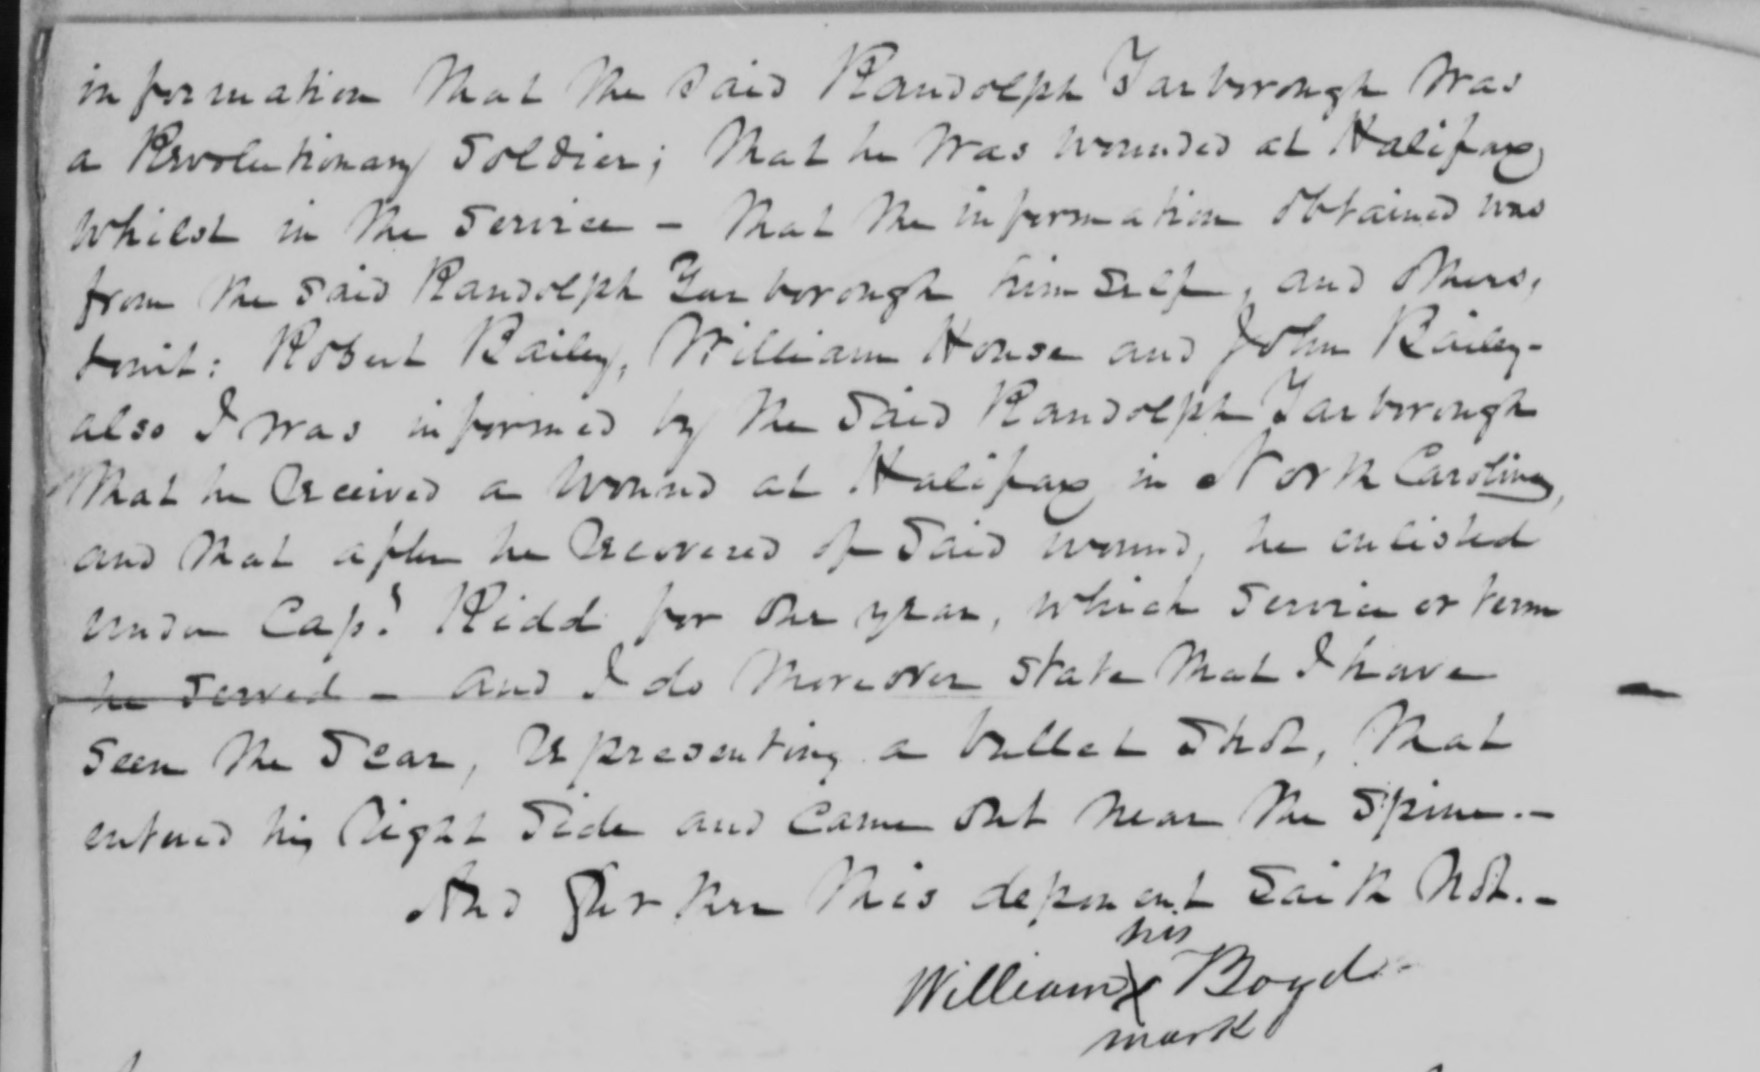 Affidavit of William Boyd in support of a Pension Claim for Mary Yarborough, 8 July 1839, page 2